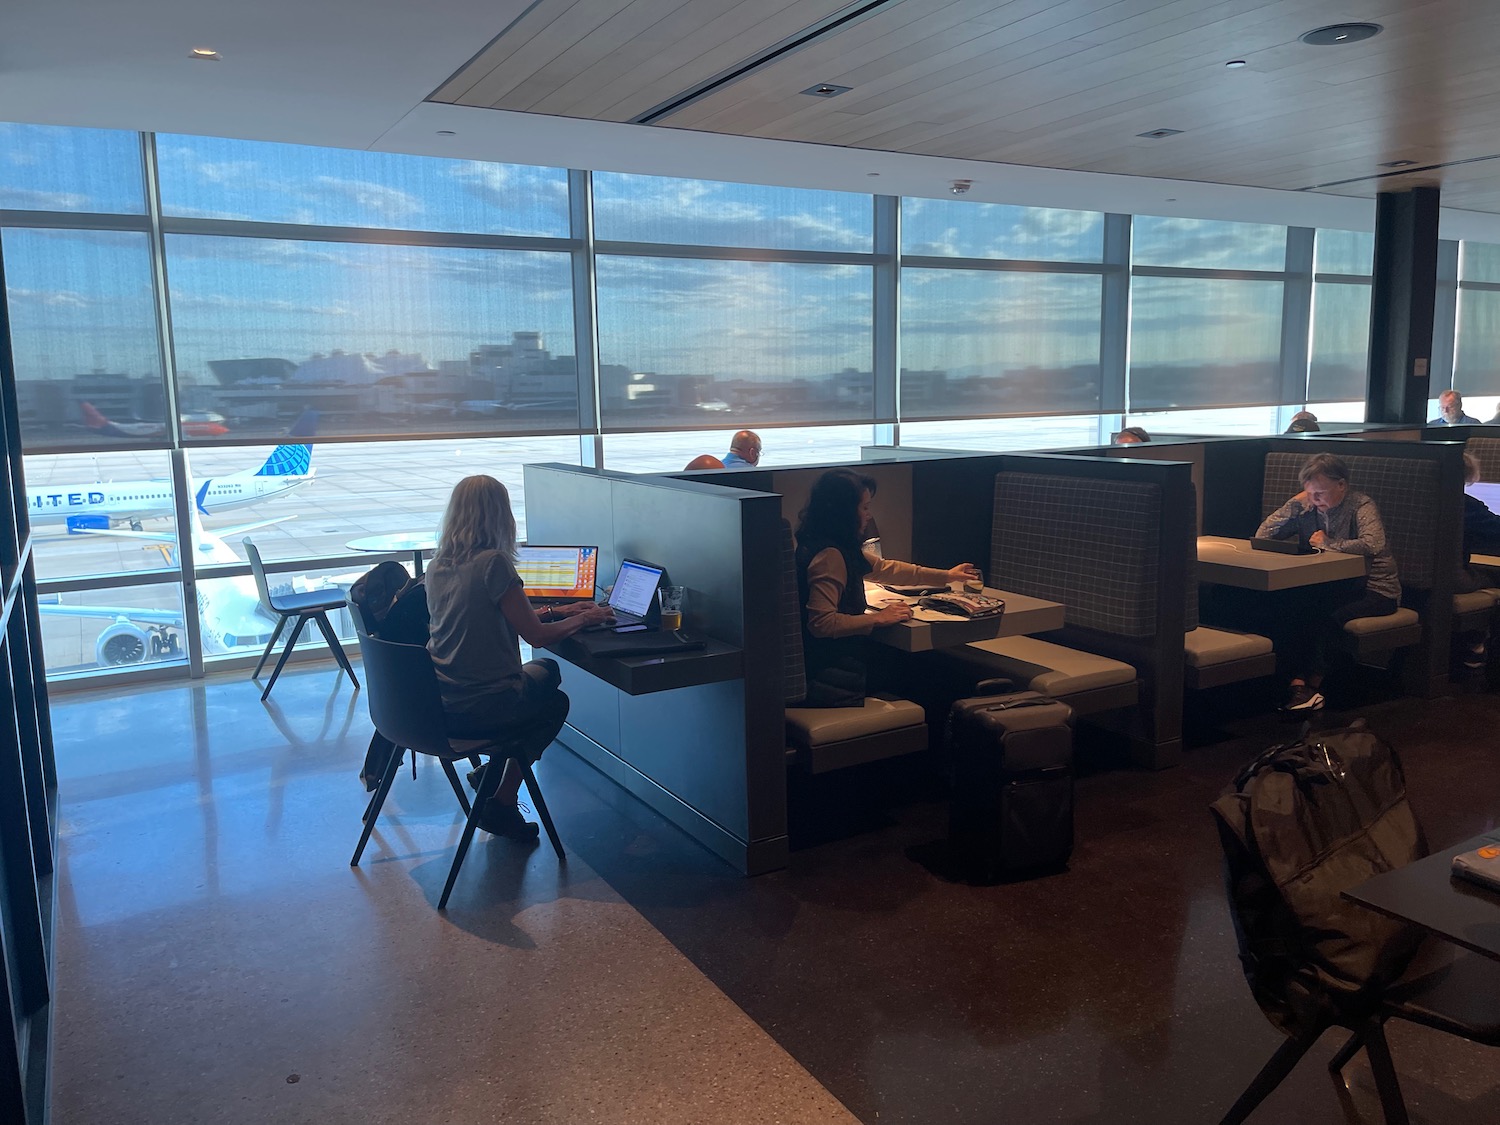 people sitting at tables in a room with windows and people sitting at tables